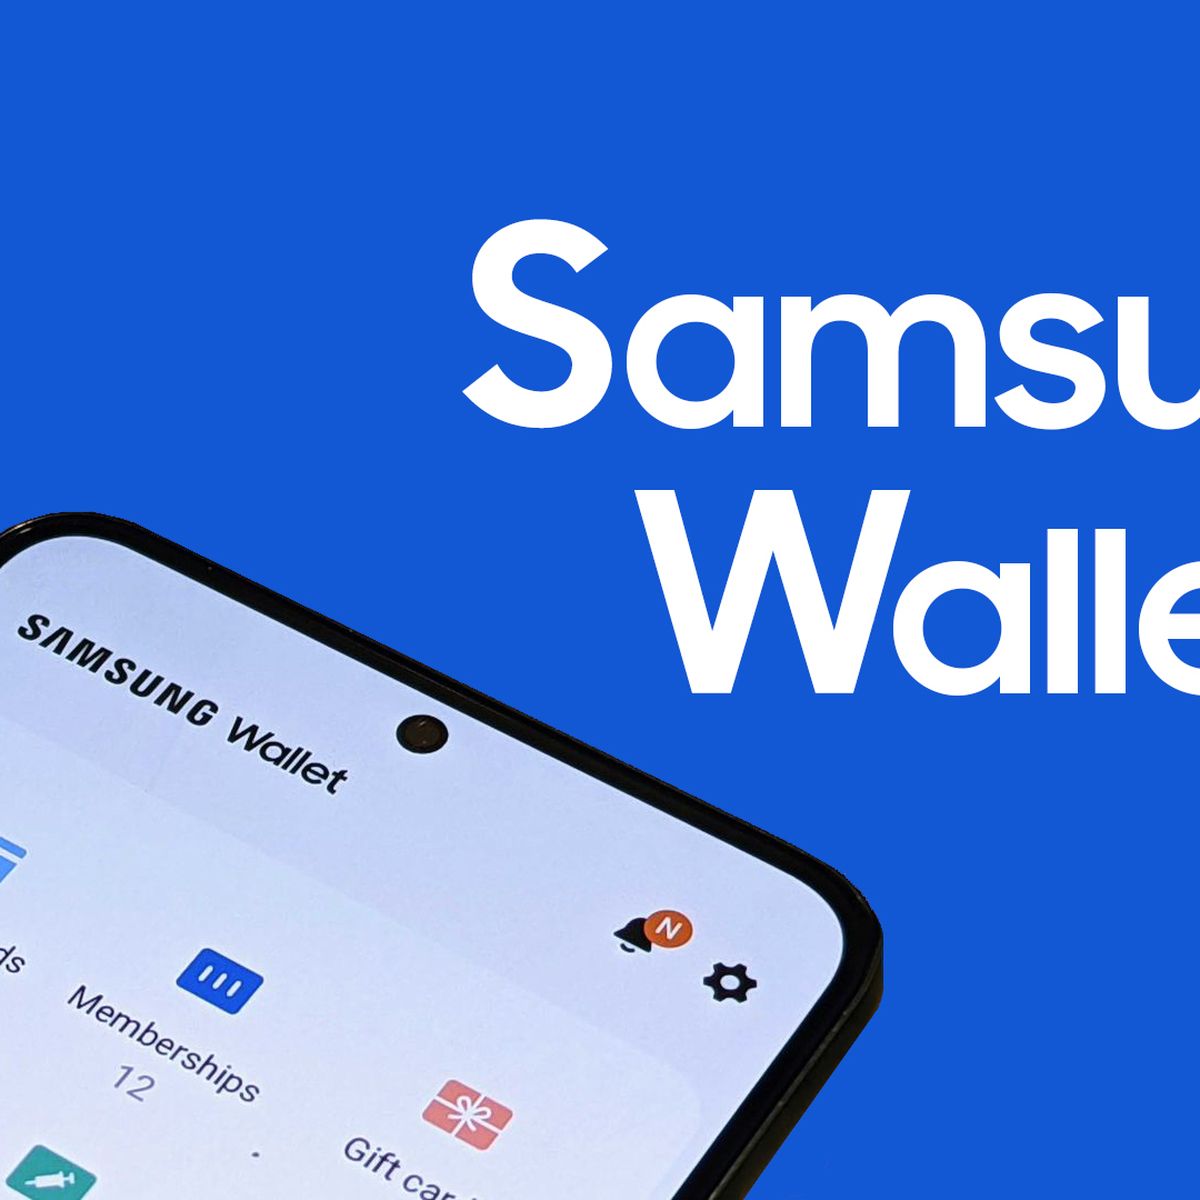 Samsung Pay gets overhaul with new Samsung Wallet app | Digital Trends